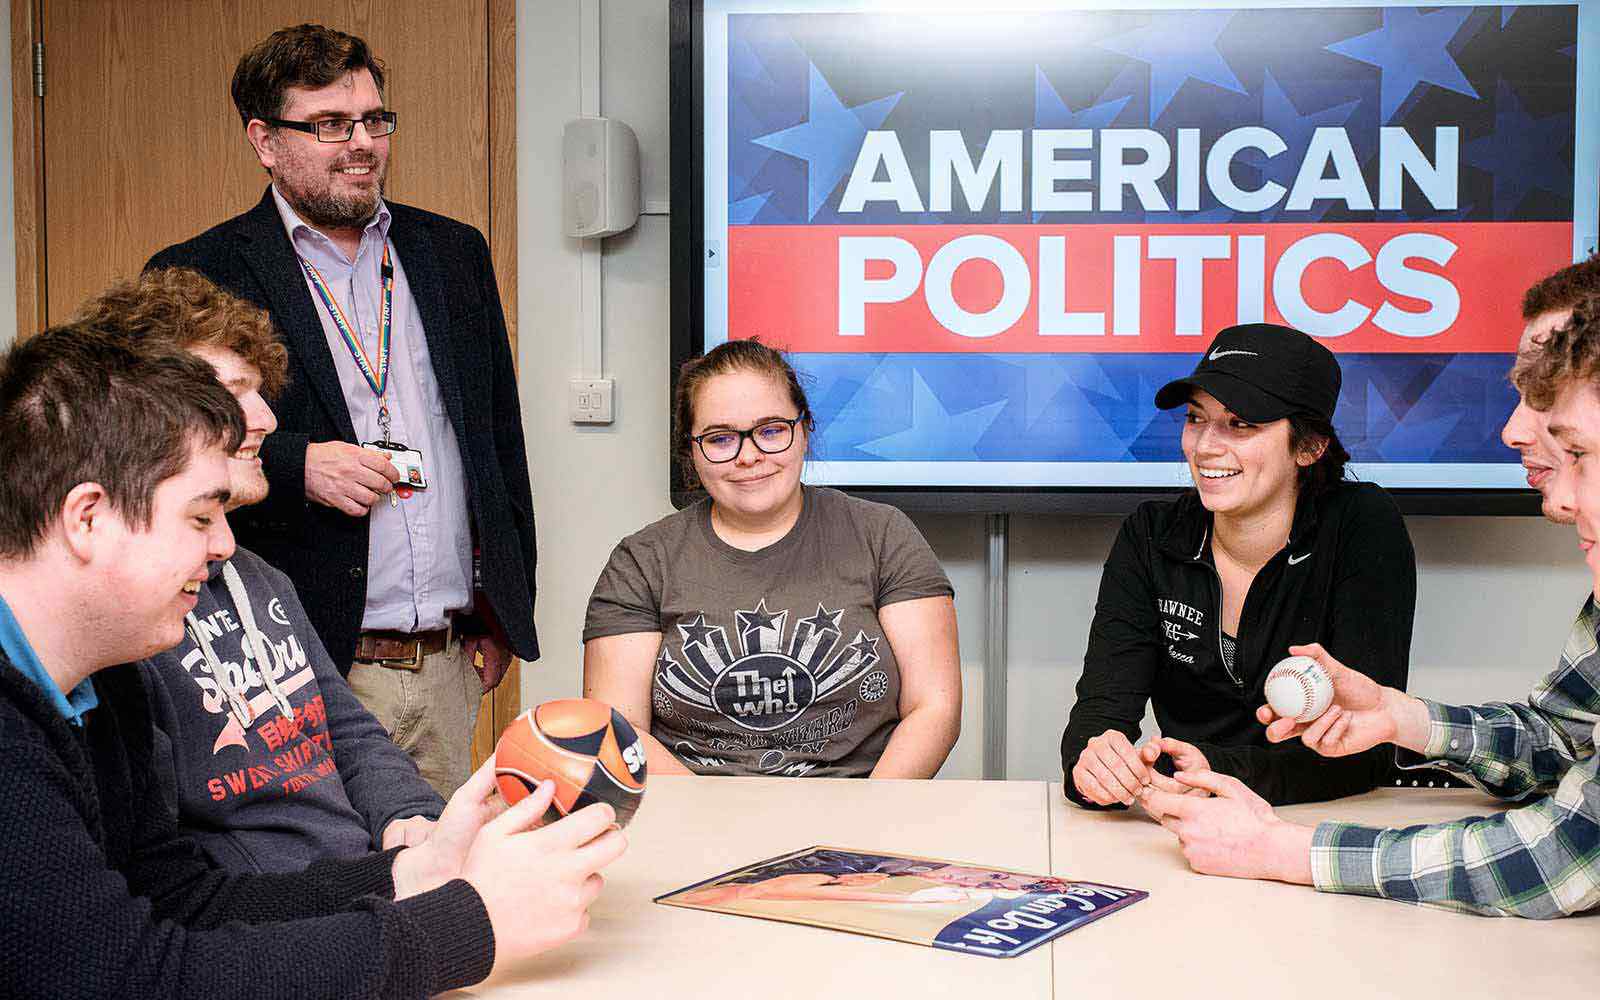 students and lecturer discuss American politics  